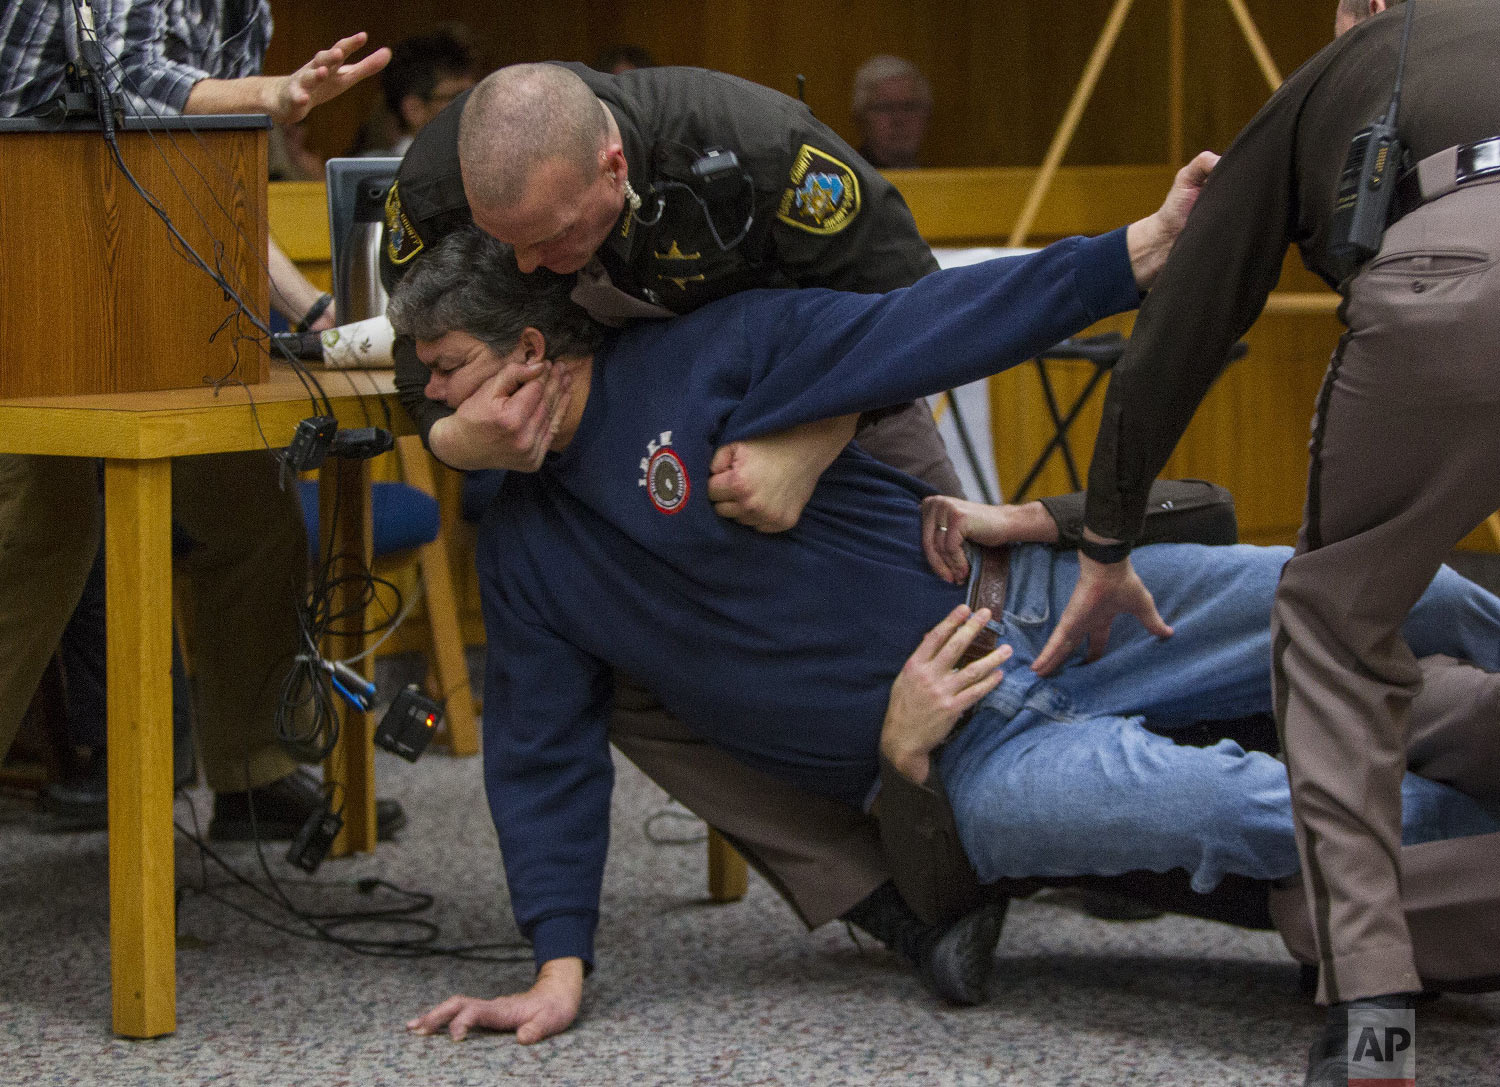  Eaton County Sheriff's deputies restrain Randall Margraves, father of three victims of Larry Nassar, on Feb. 2, 2018, in Eaton County Circuit Court in Charlotte, Mich. The incident came during the third and final sentencing hearing for Nassar on sex